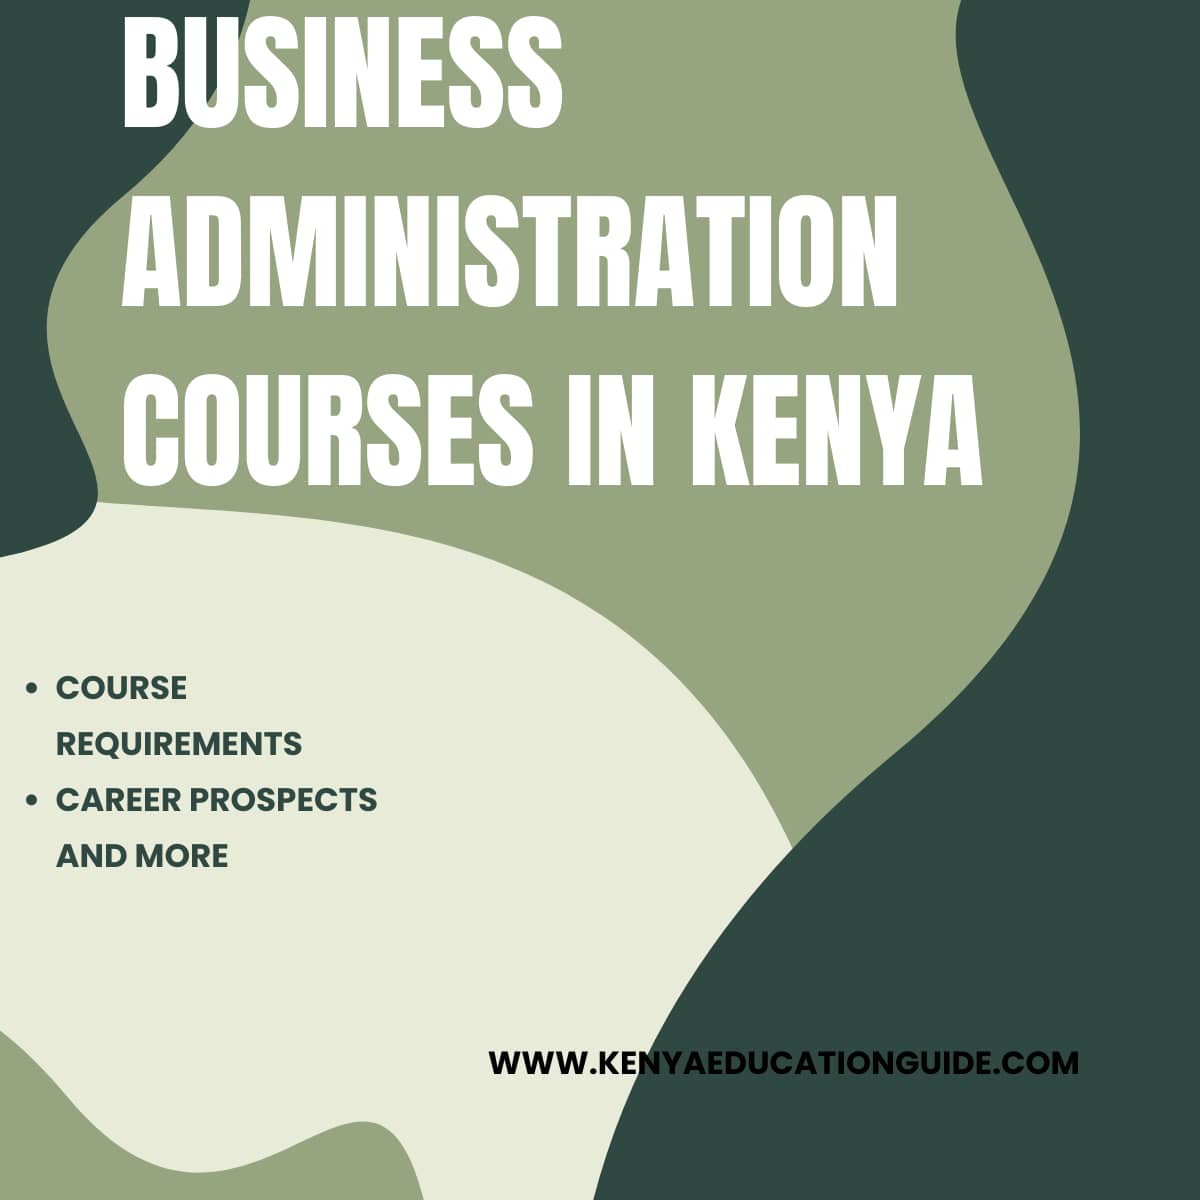 Business Administration Courses in Kenya